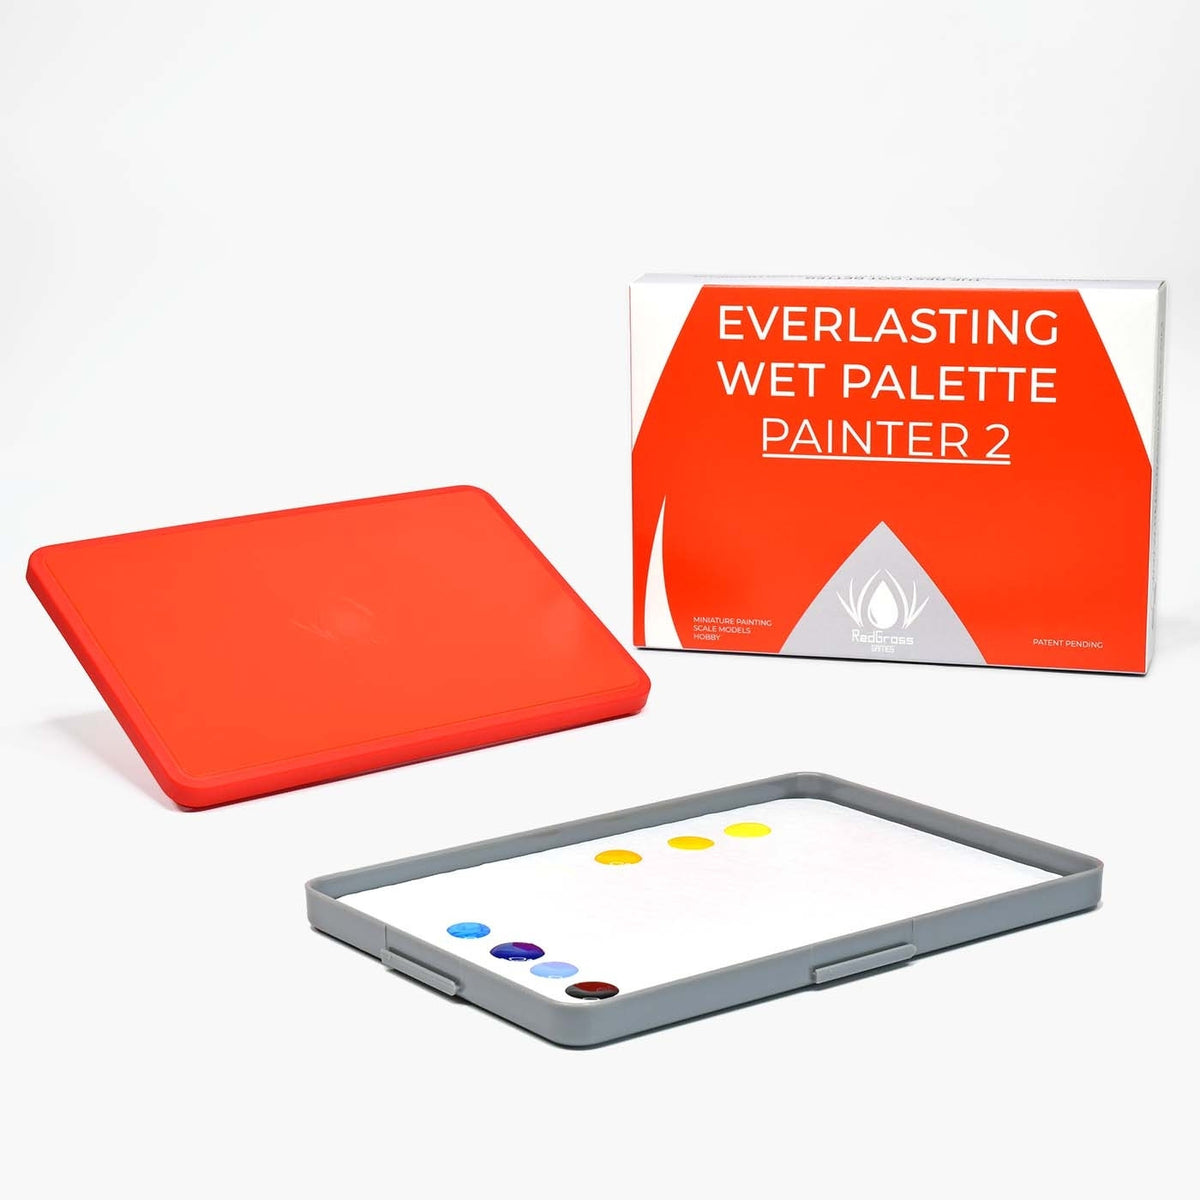 How To Use A Wet Palette - Redgrasscreative